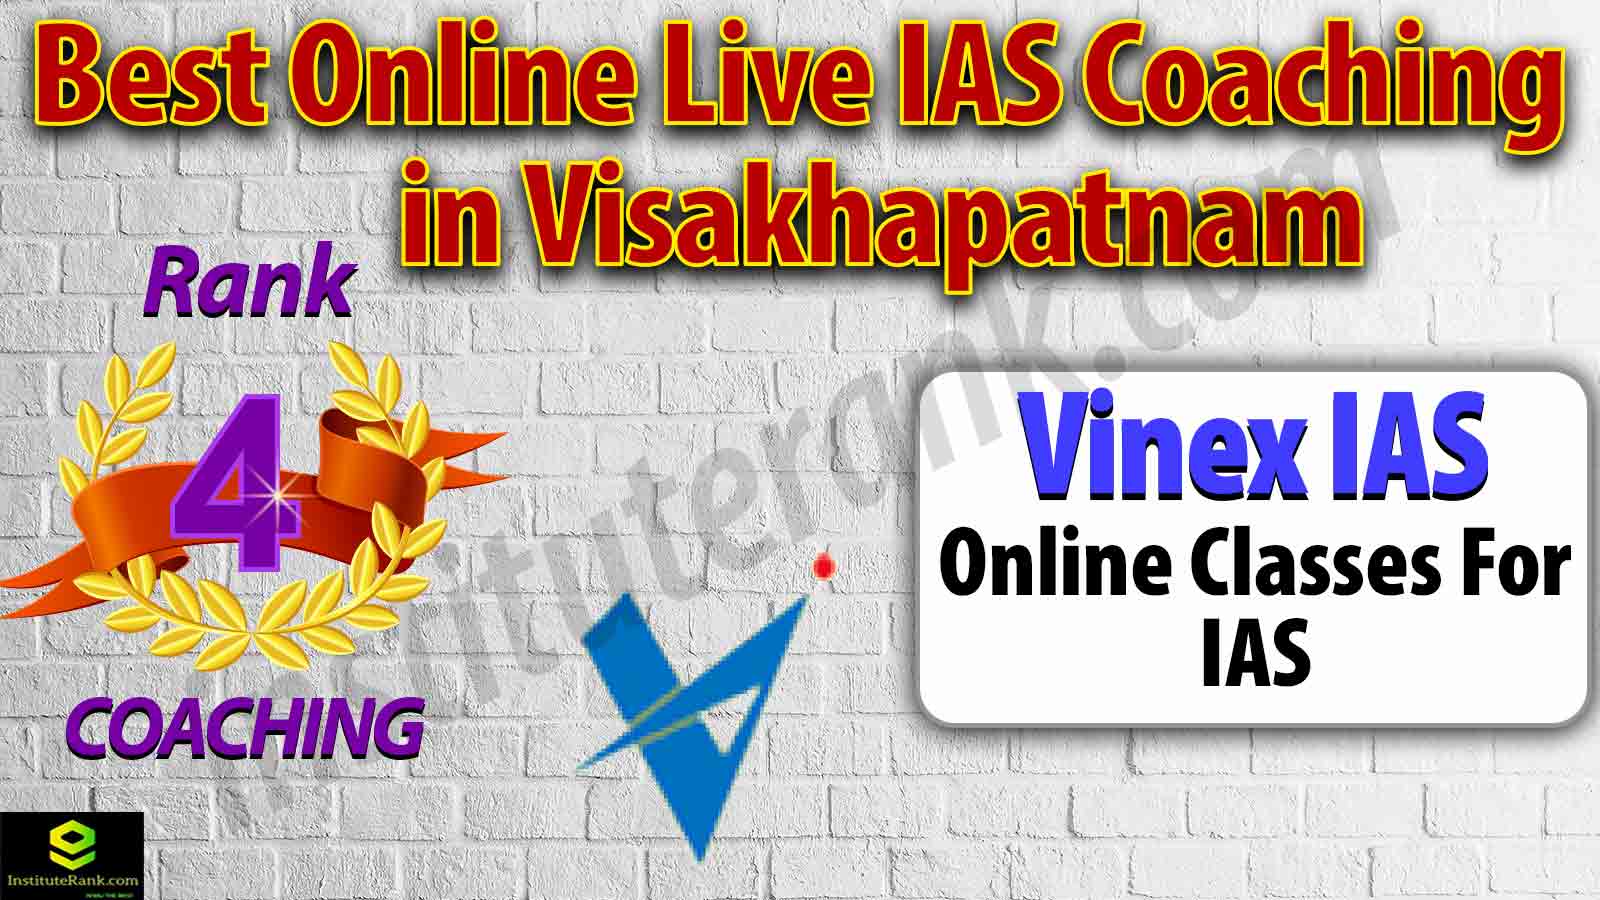 Best Online live IAS Coaching in Visakhapatnam